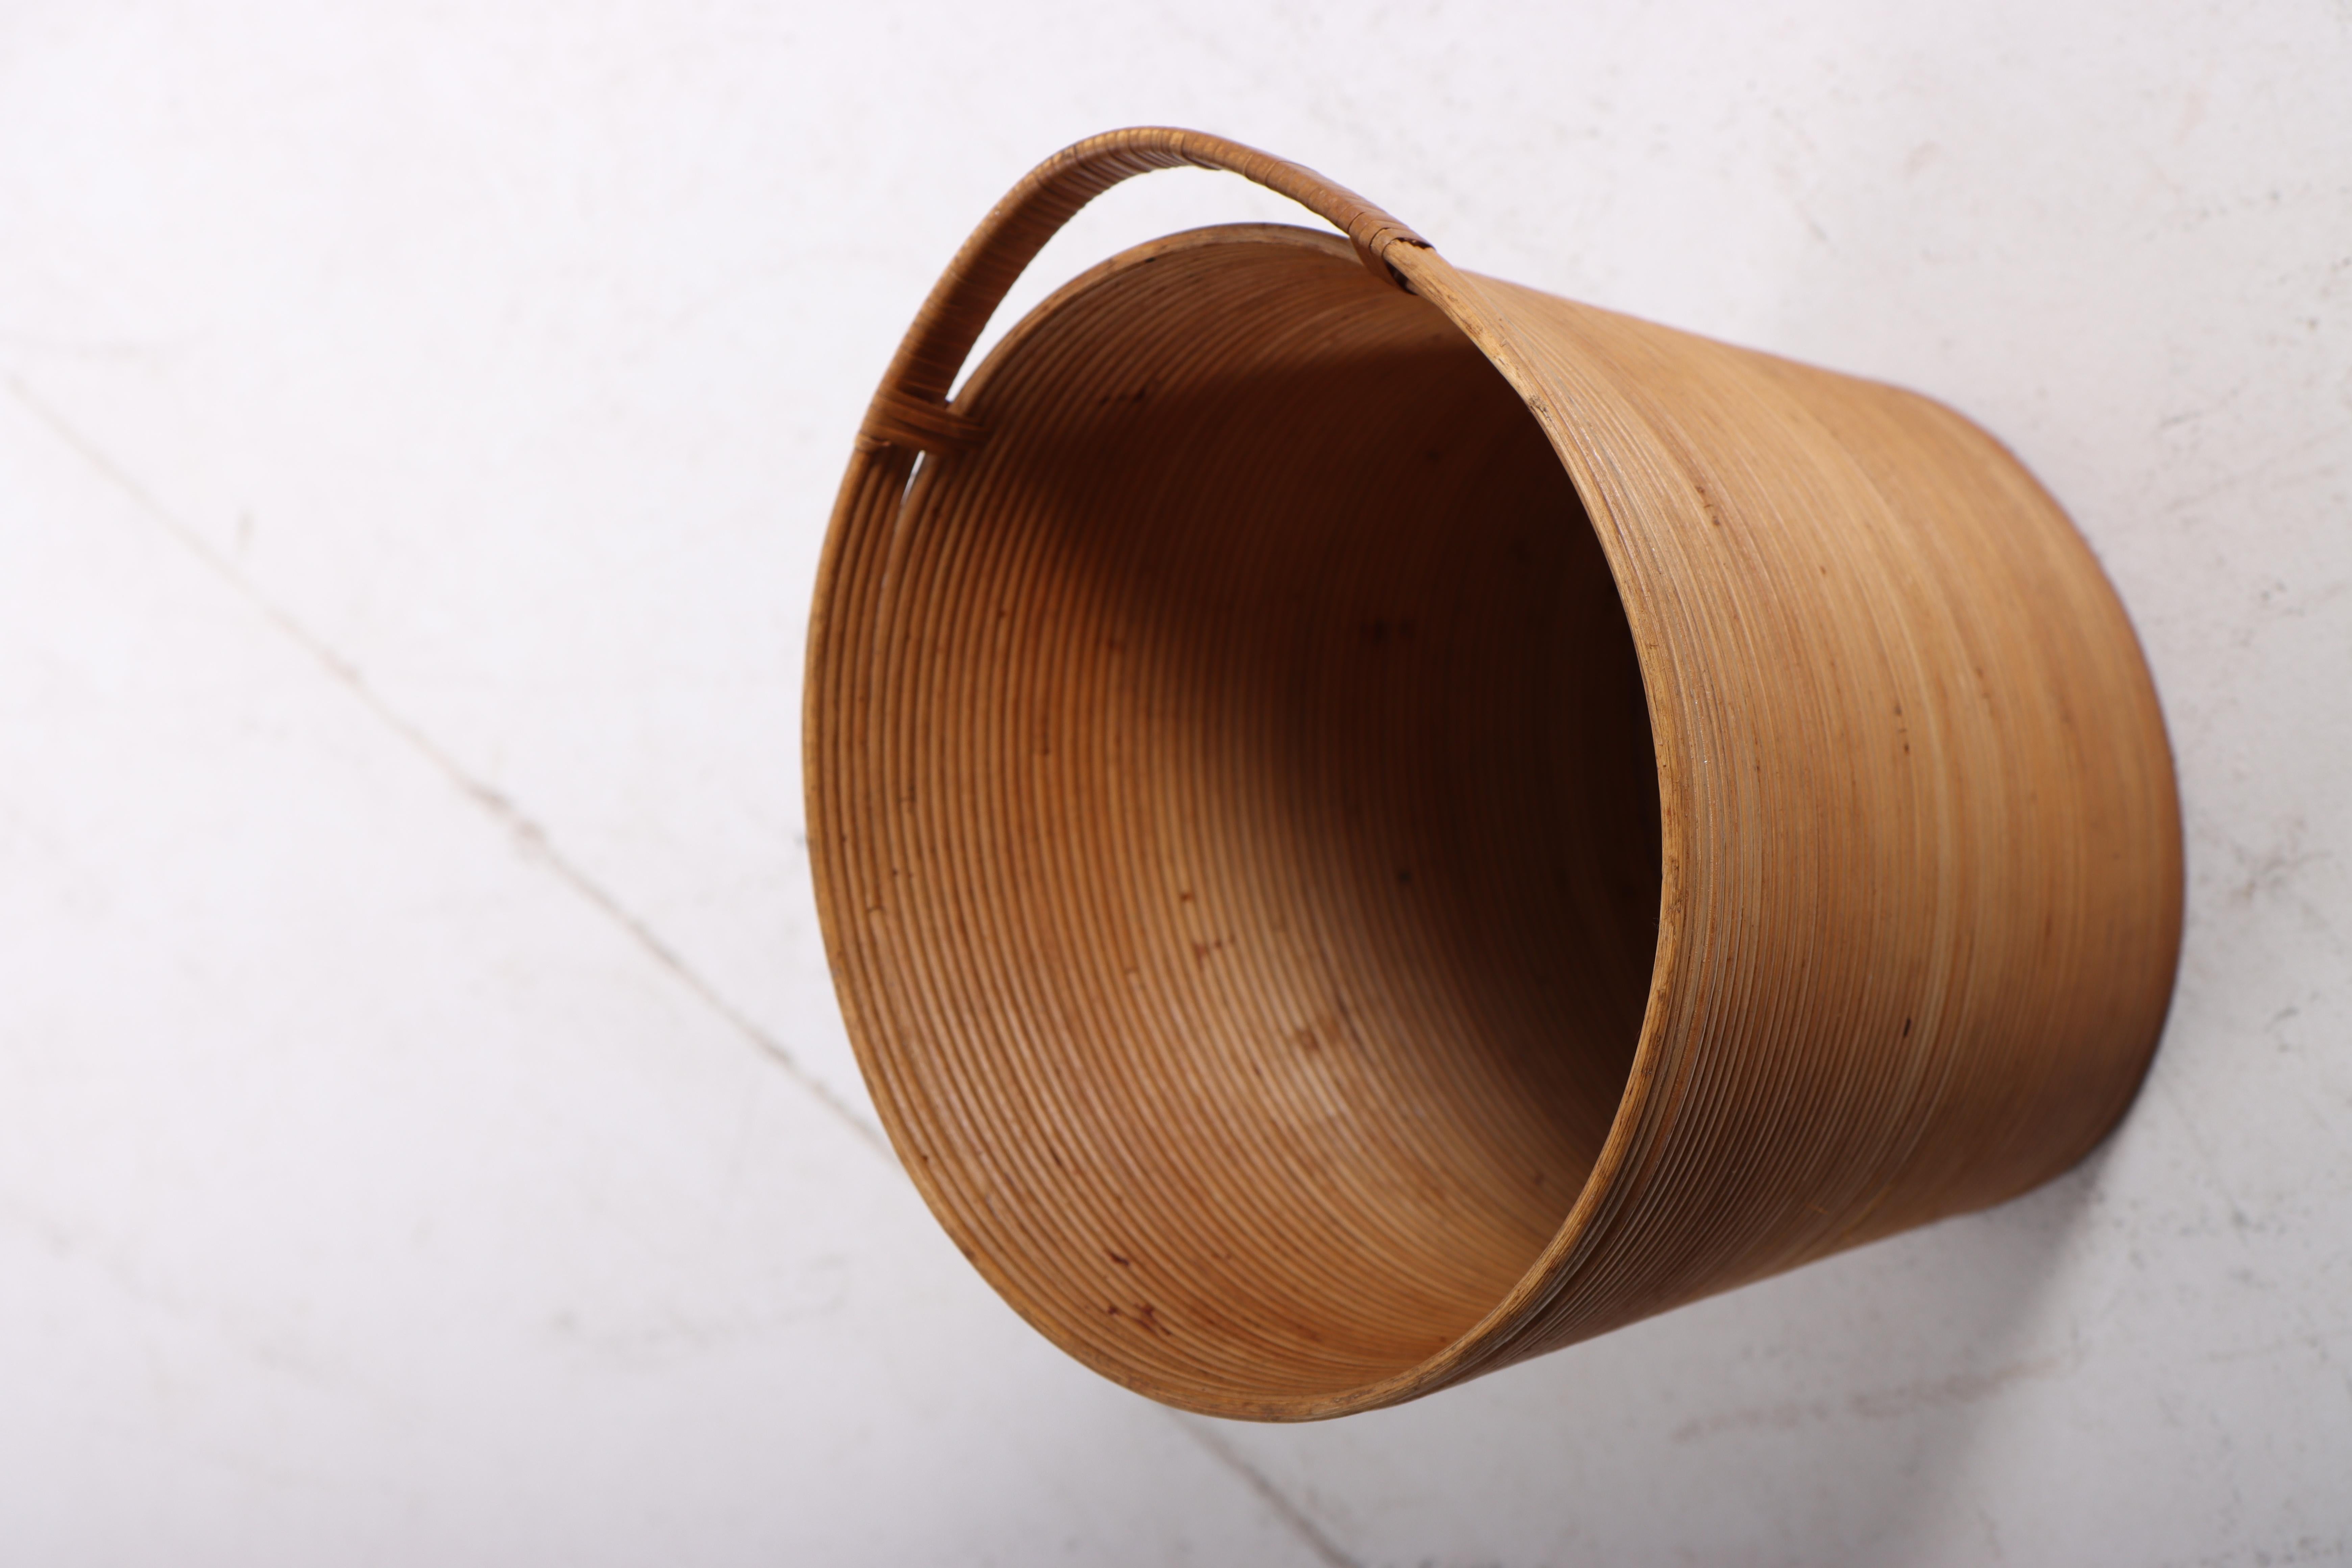 Cane Rare Midcentury Waste Bin in Bamboo, by Lauritz Lønborg, Made in Denmark, 1950s For Sale